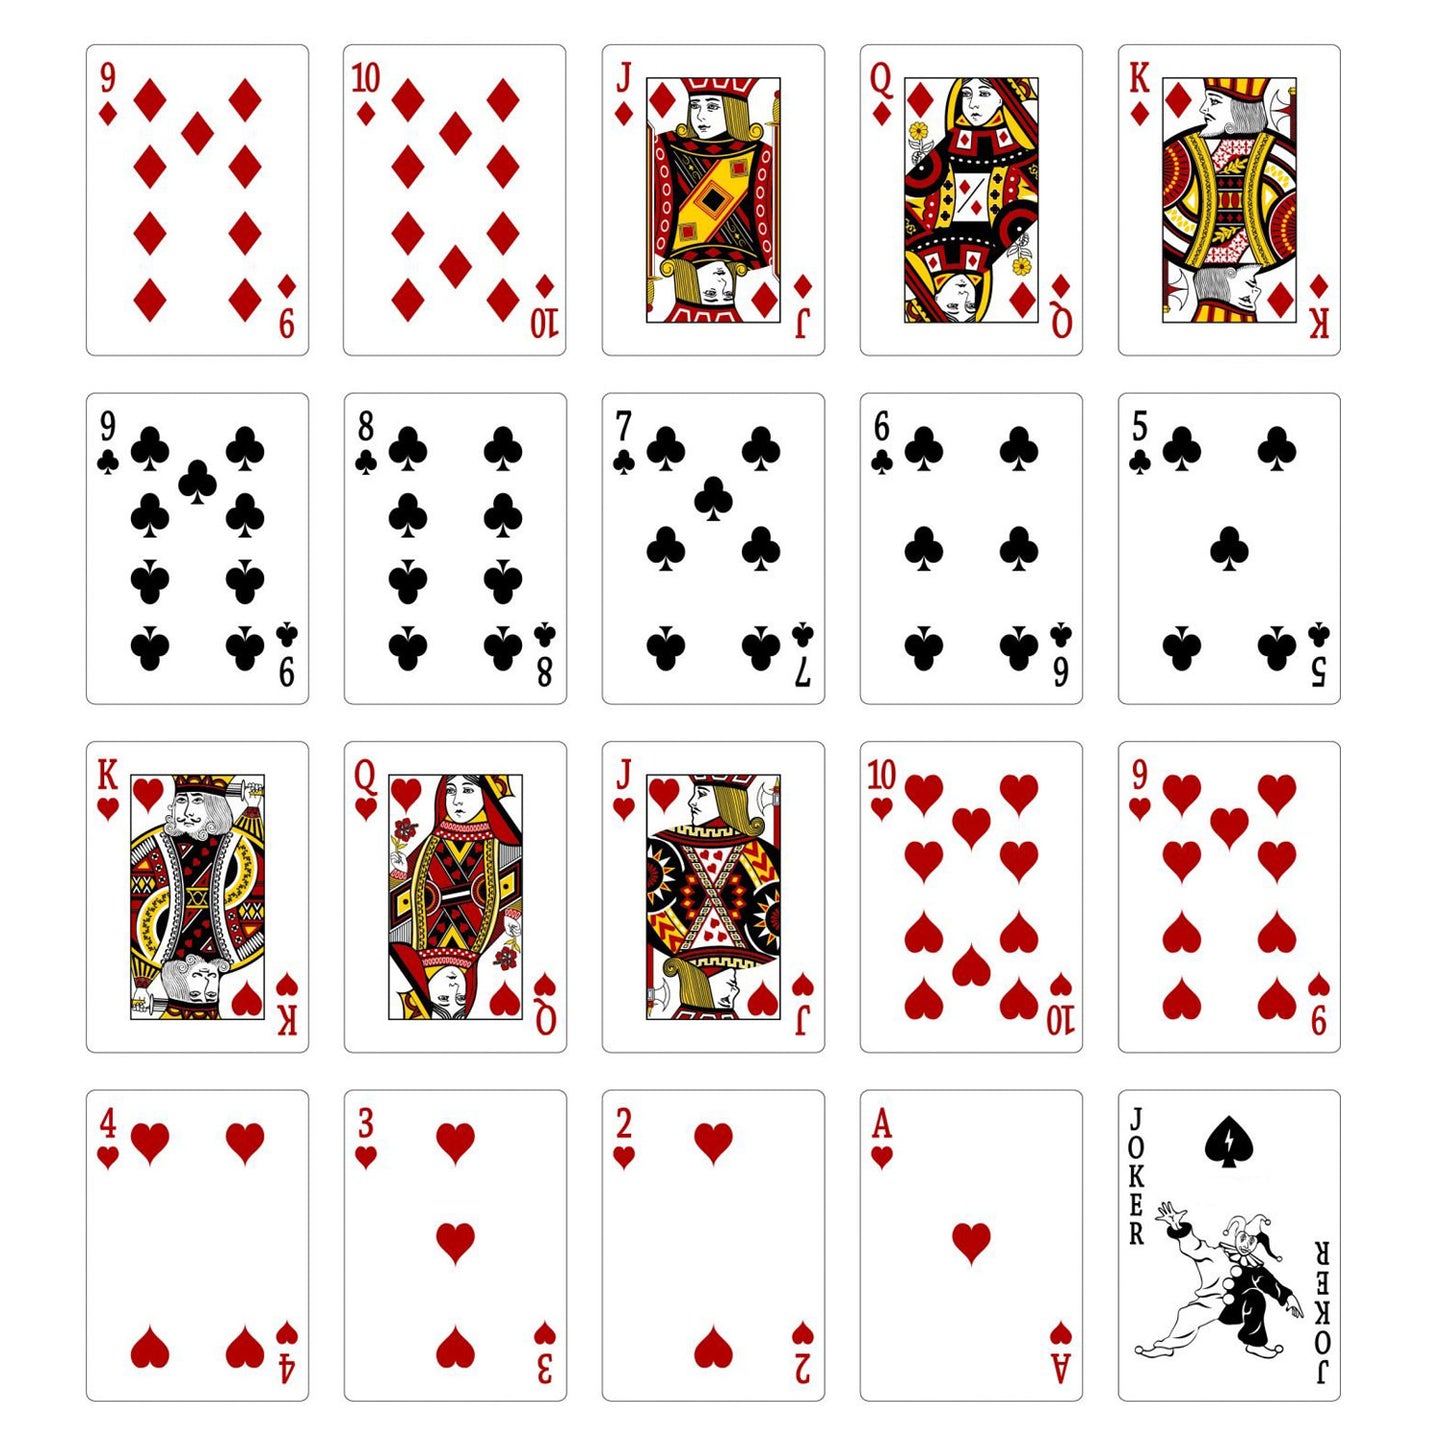 RED LEATHER CUSTOM PLAYING CARDS